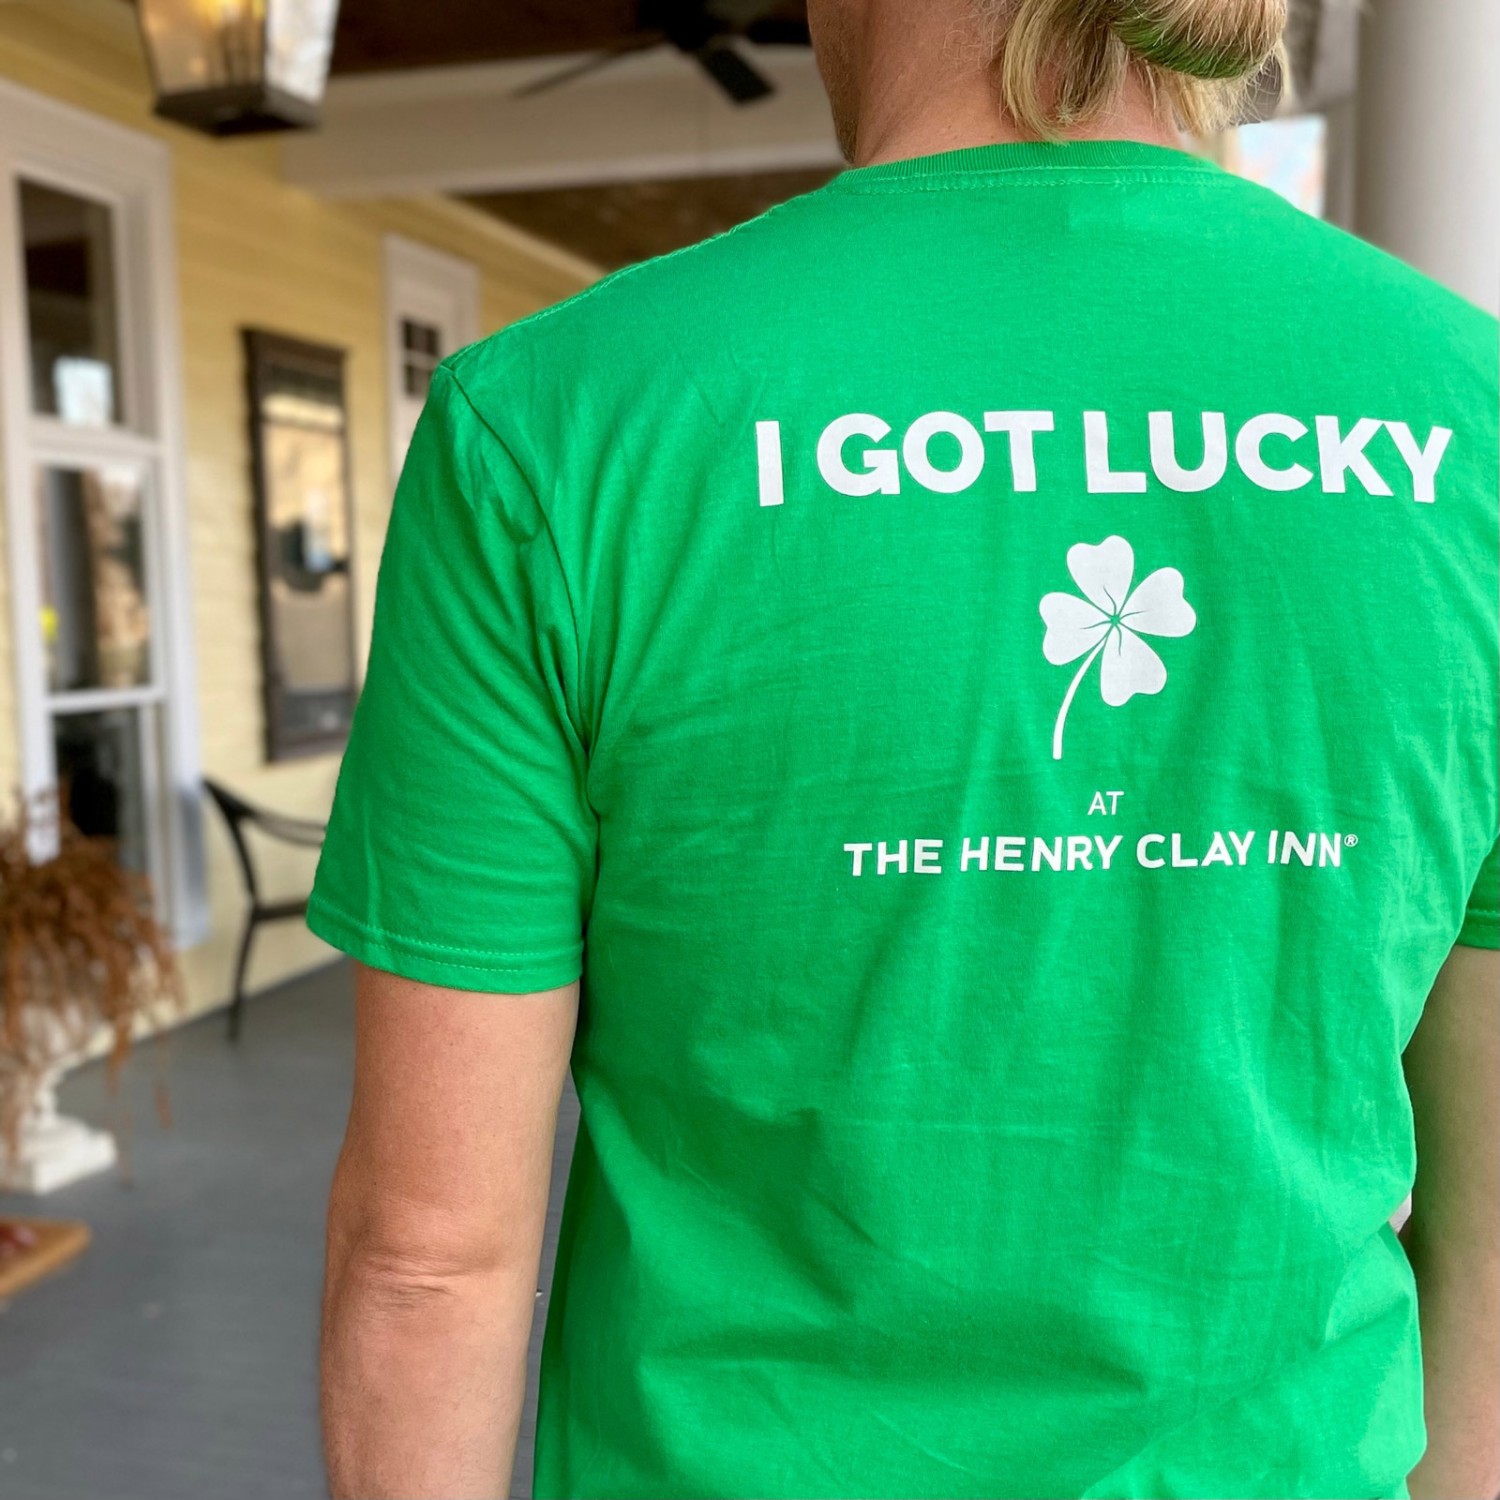 Celebrate St. Patrick’s Day with a little luck from The Henry Clay Inn, Sizes S-2XL $20